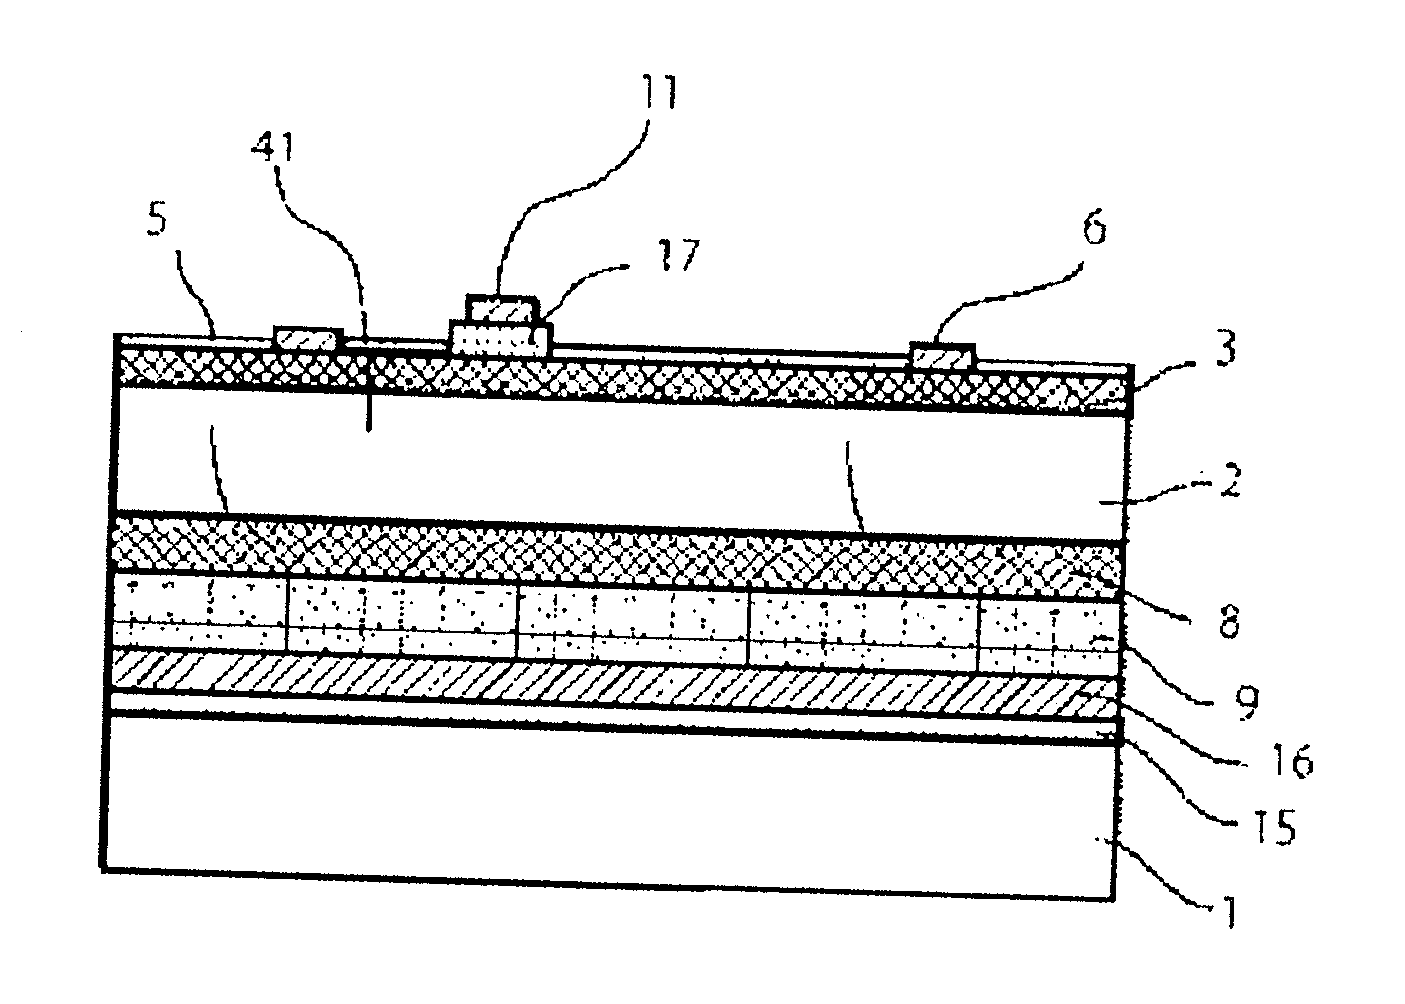 Compound semiconductor light-receiving element array